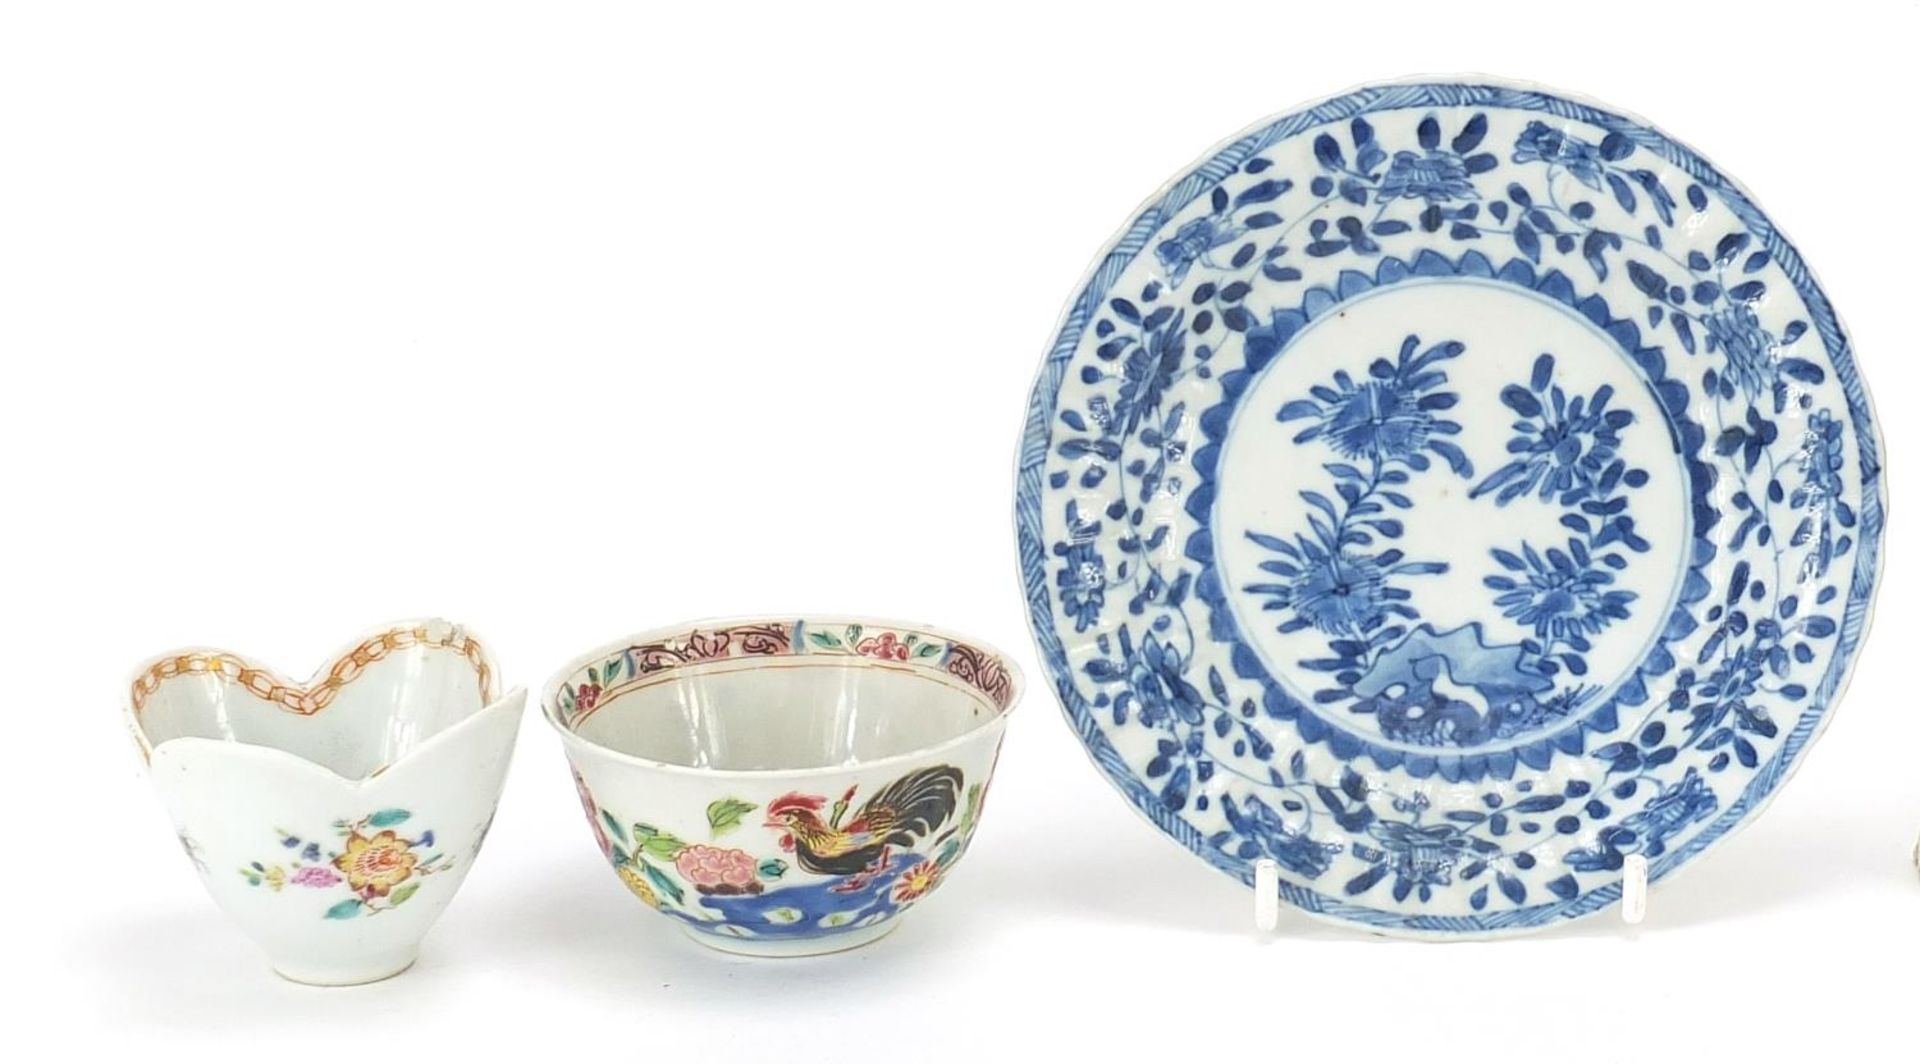 Chinese porcelain including blanc de chine figurine of Guanyin, blue and white plates and tea - Image 2 of 6